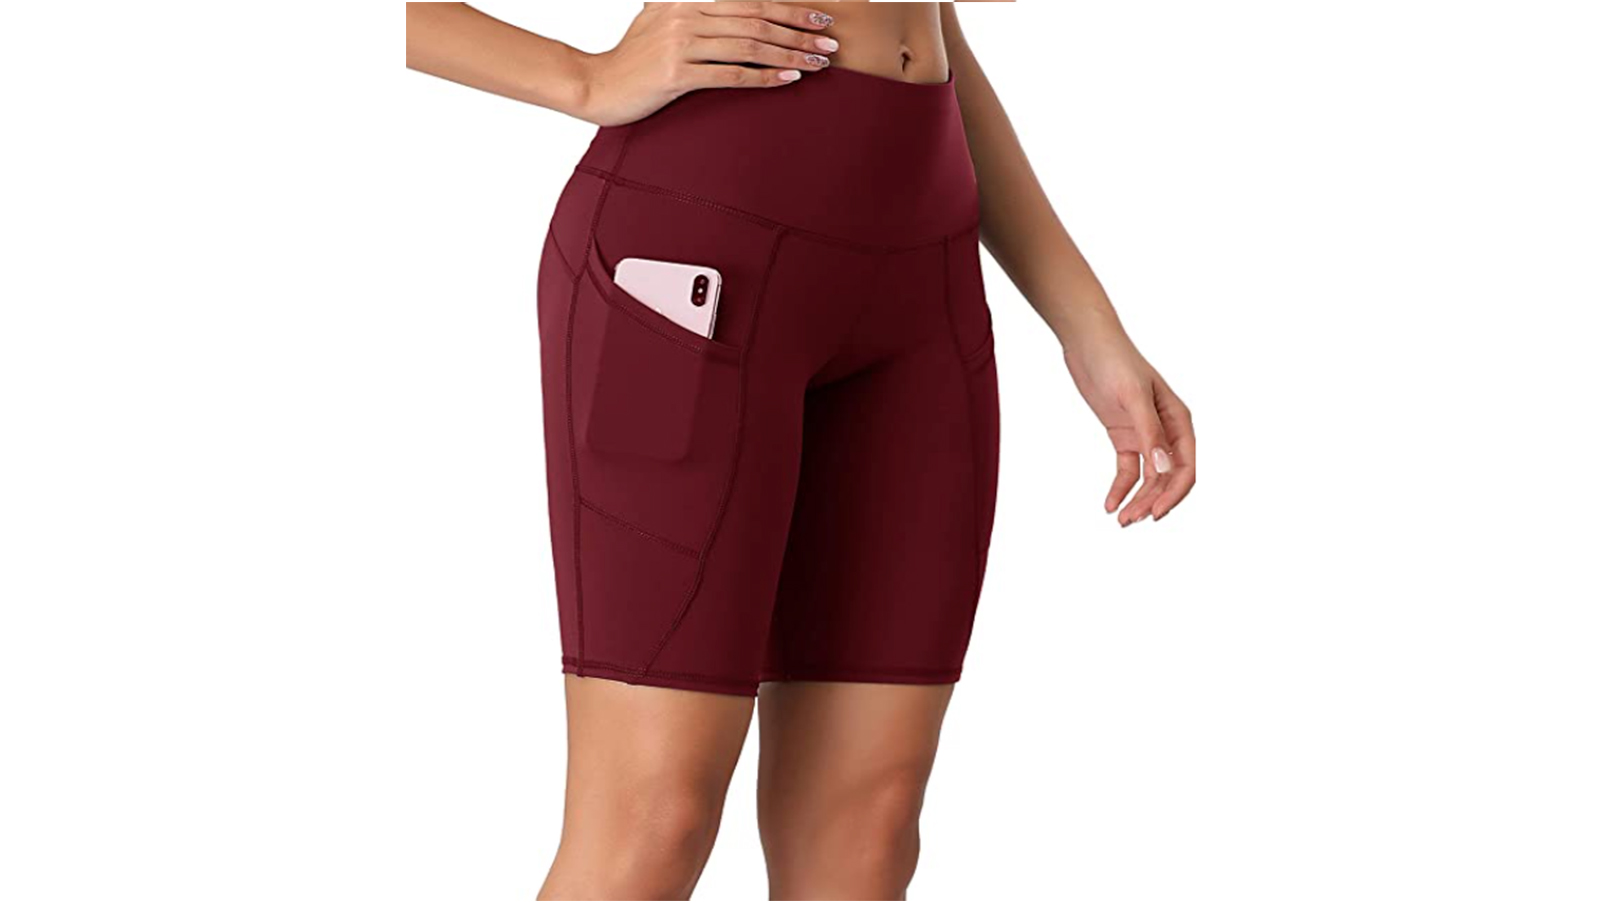 leggings for women high waisted with pockets pack : LifeSky Yoga